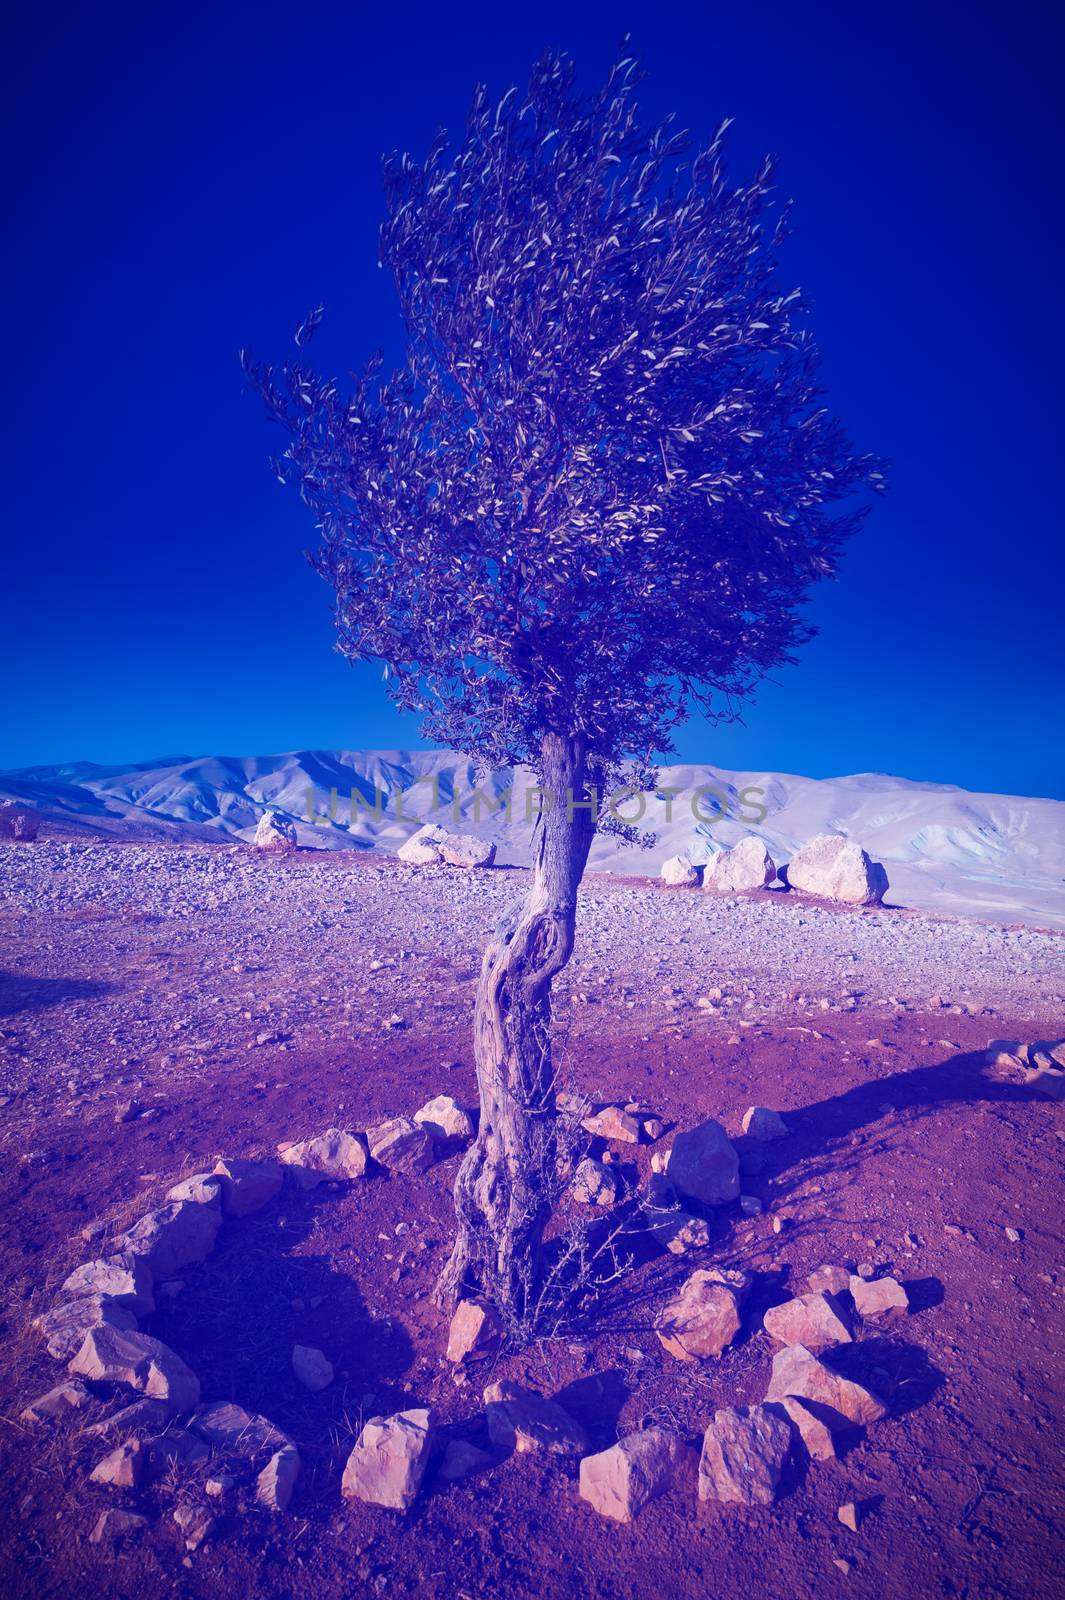 Olive  on the Slopes of the Mountains of Samaria, Instagram Effect